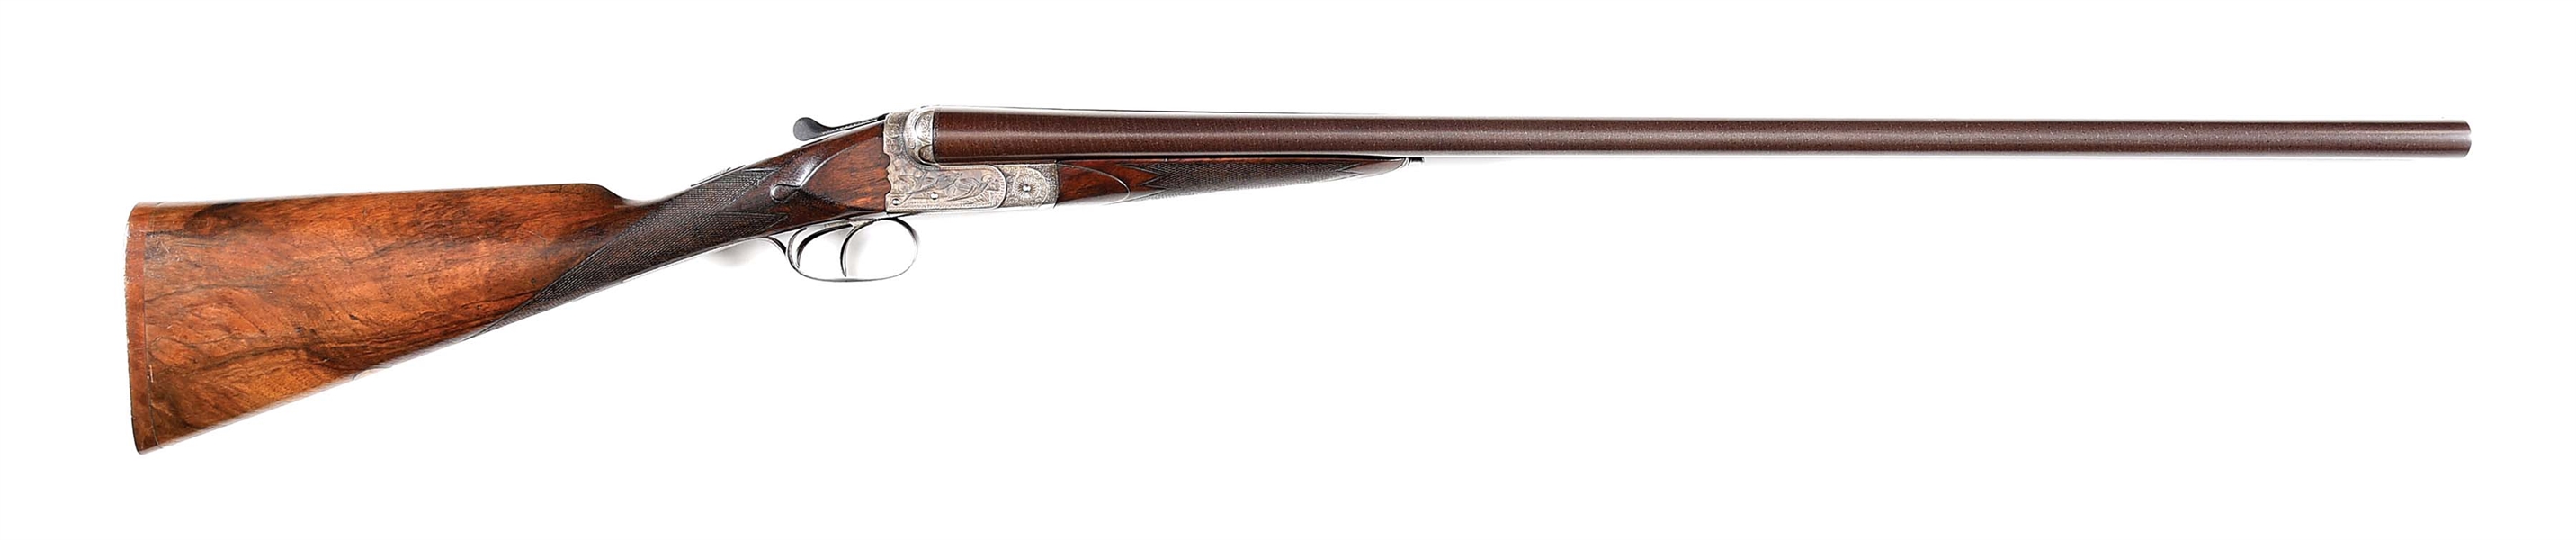 (C) ARMSTRONG & CO. BOXLOCK NON EJECTOR 12 BORE SIDE BY SIDE SHOTGUN.